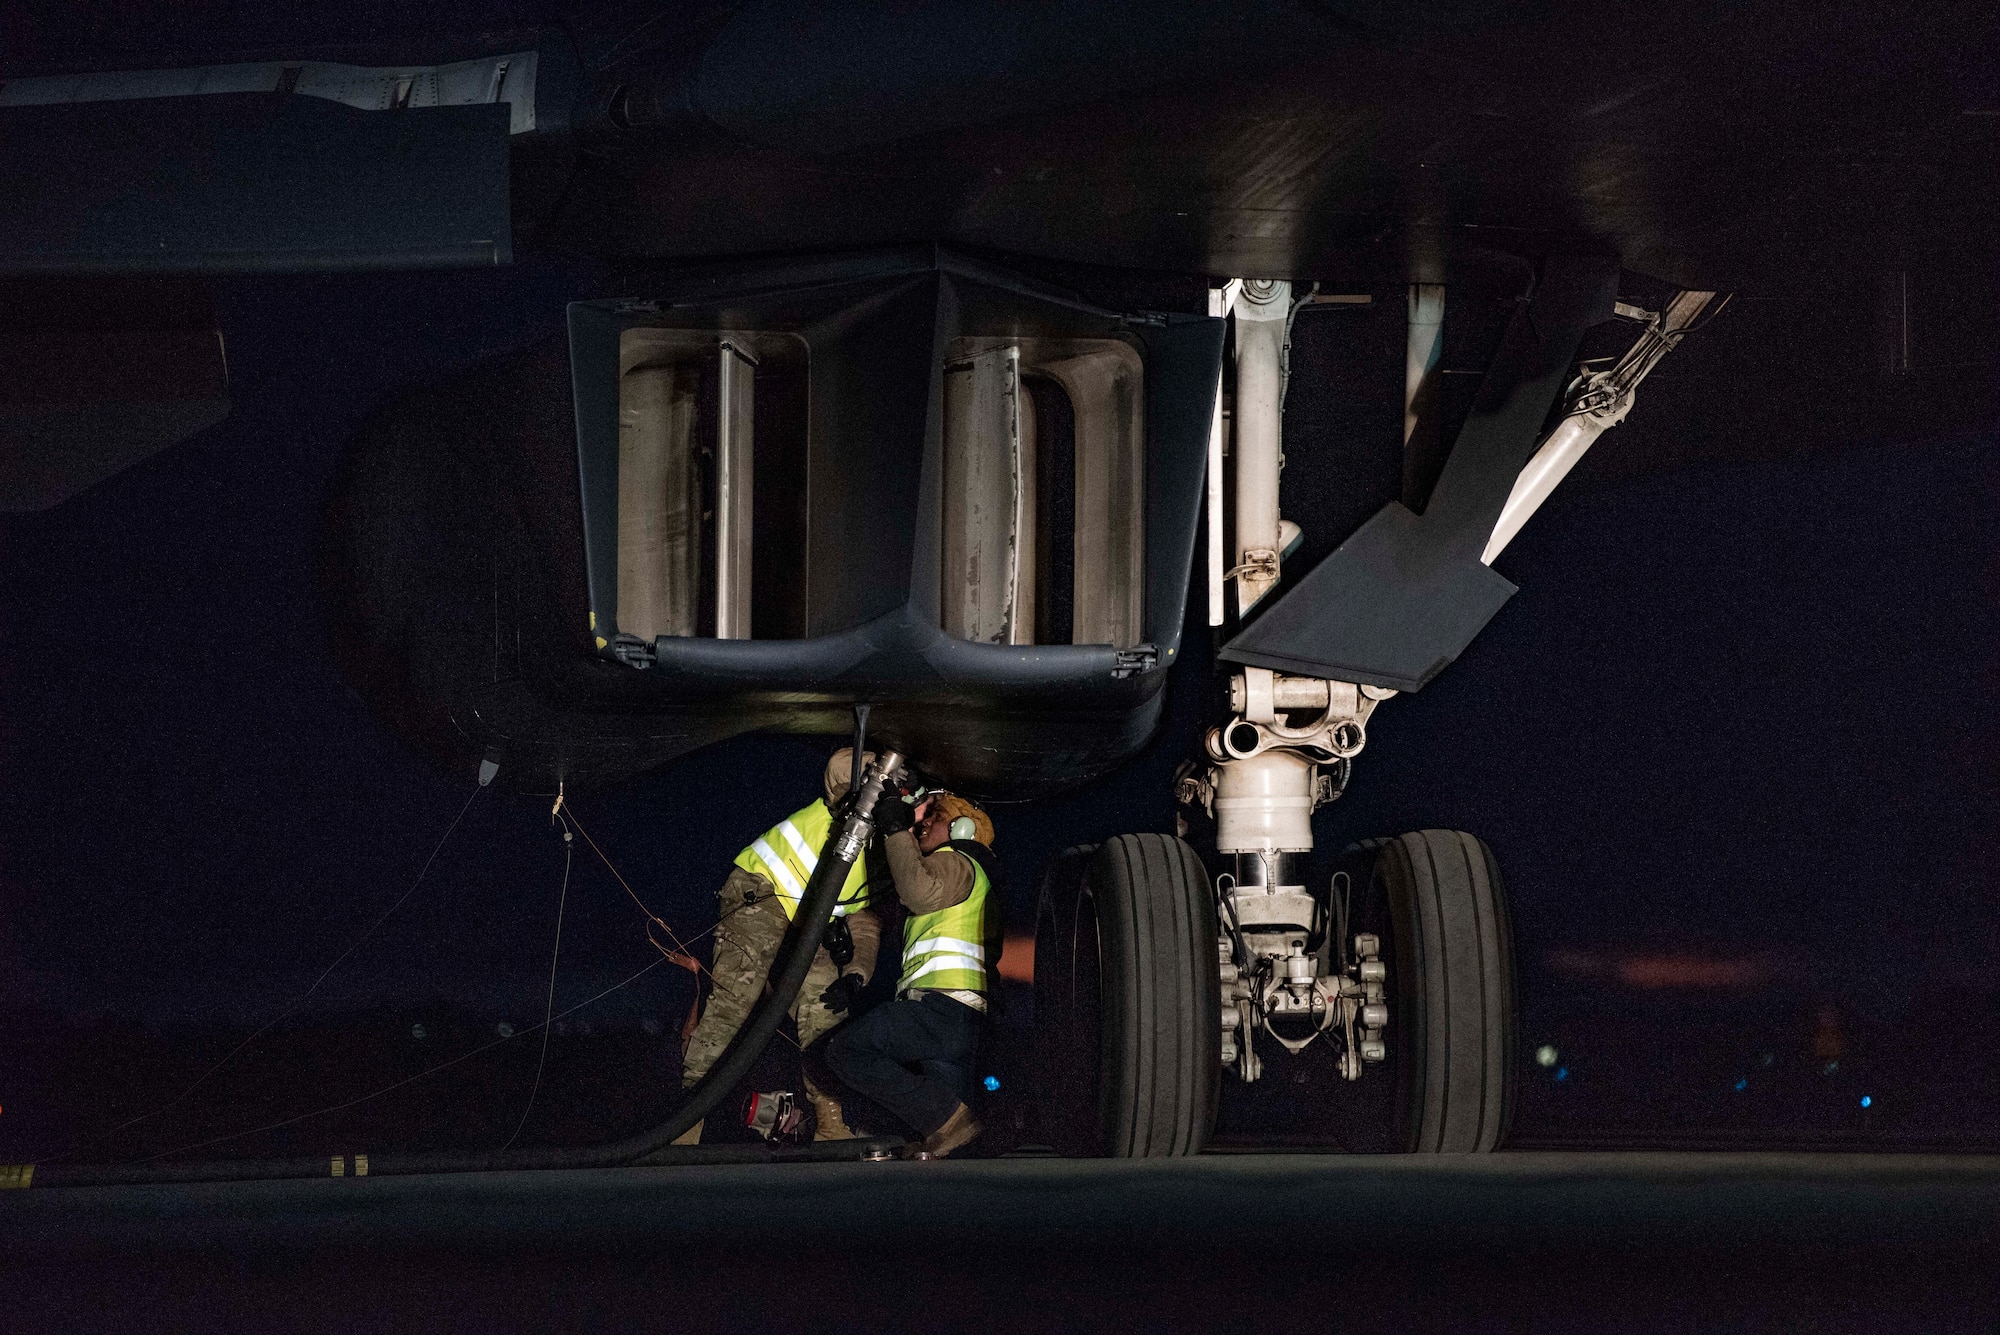 Crew chiefs assigned to the 9th Expeditionary Bomb Squadron attach a fuel hose to a B-1B Lancer as part of a hot-pit refuelling mission at Ørland Air Force Station, Norway, March 12, 2021. During a hot-pit, an aircraft is refuelled shortly after landing without shutting down the engines or auxiliary systems, reducing the amount of time the jet spends on the ground. (U.S. Air Force photo by Airman 1st Class Colin Hollowell)